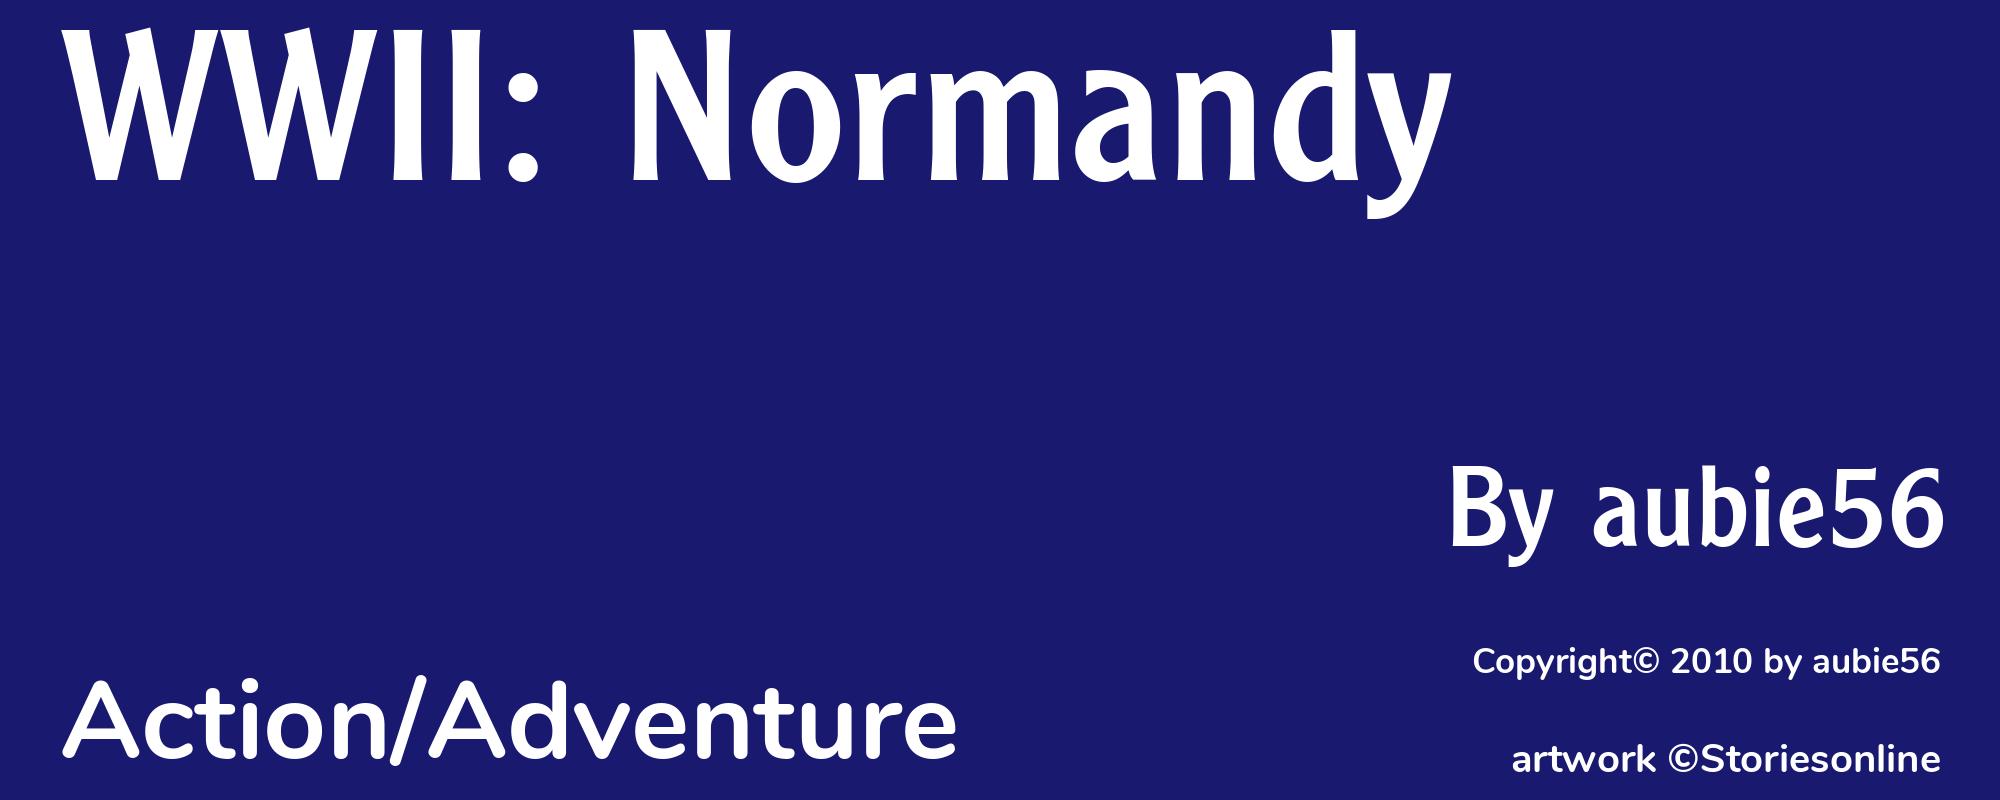 WWII: Normandy - Cover